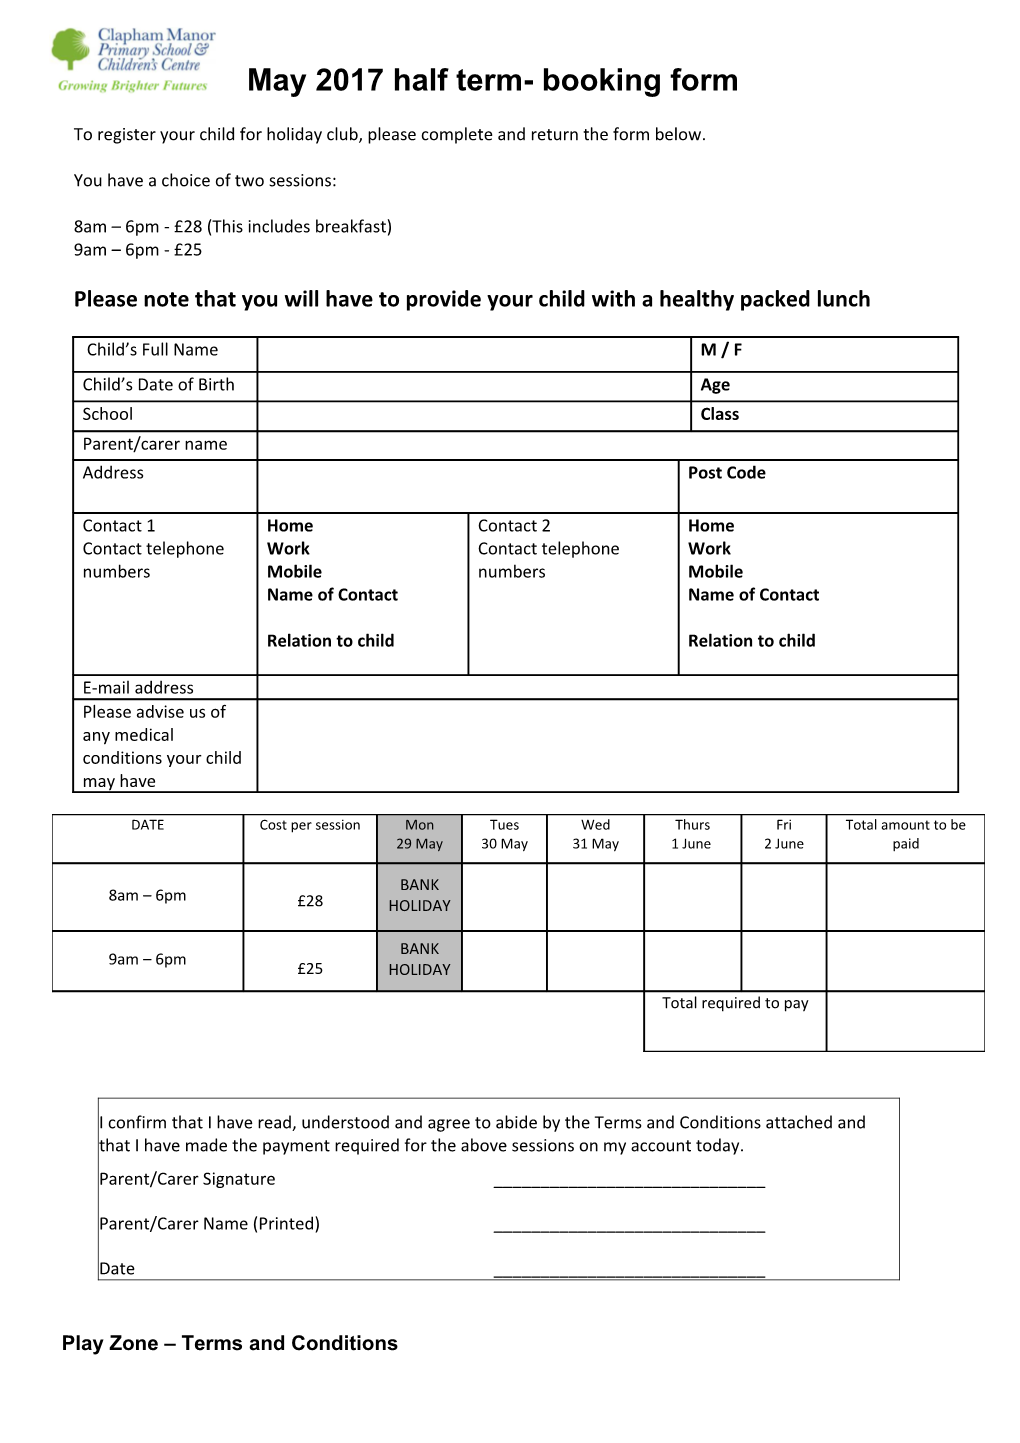 To Register Your Child for Holiday Club, Please Complete and Return the Form Below